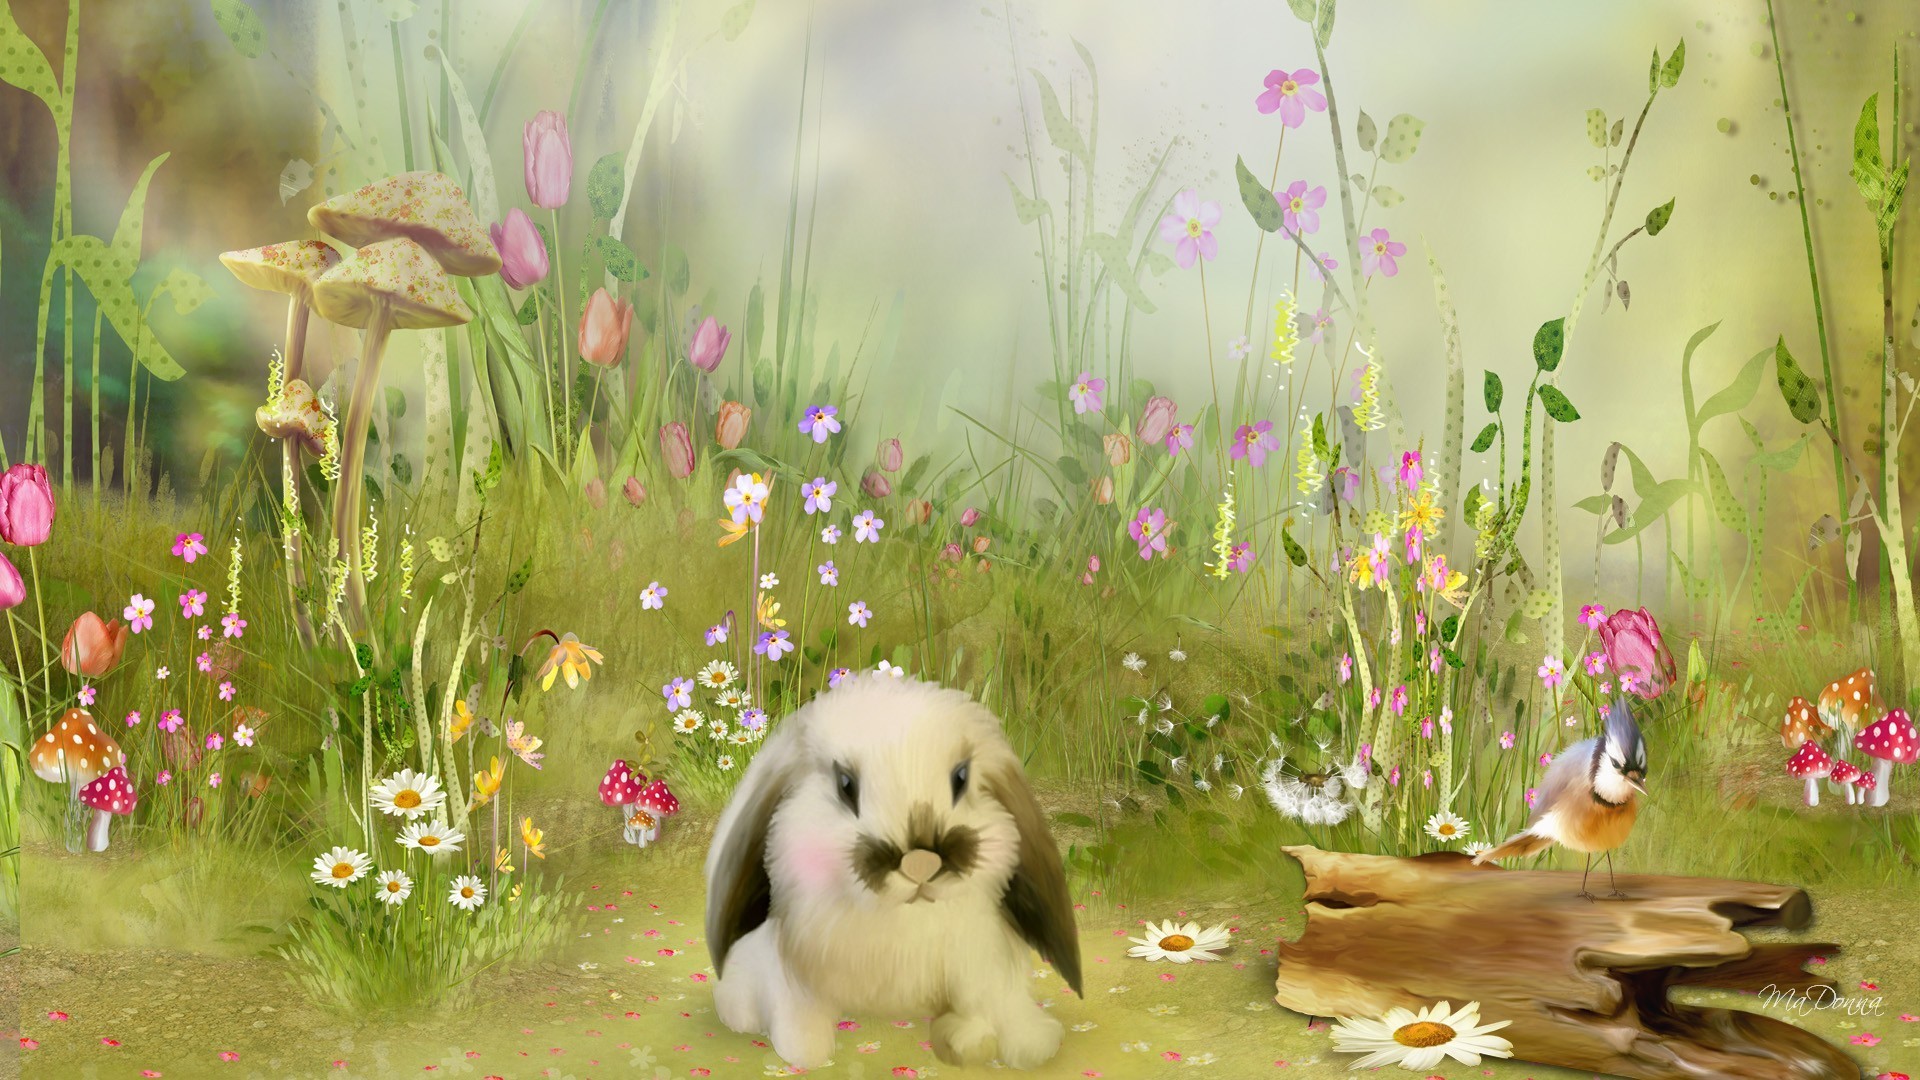 1920x1080 Download Wild Bunny Nature Meditate Sky Soft Flowers Peace Easter Spring  Toadstools Daisies Log Peaceful Grass Harmony Serene Fleurs Light Mishrooms  Bird ...